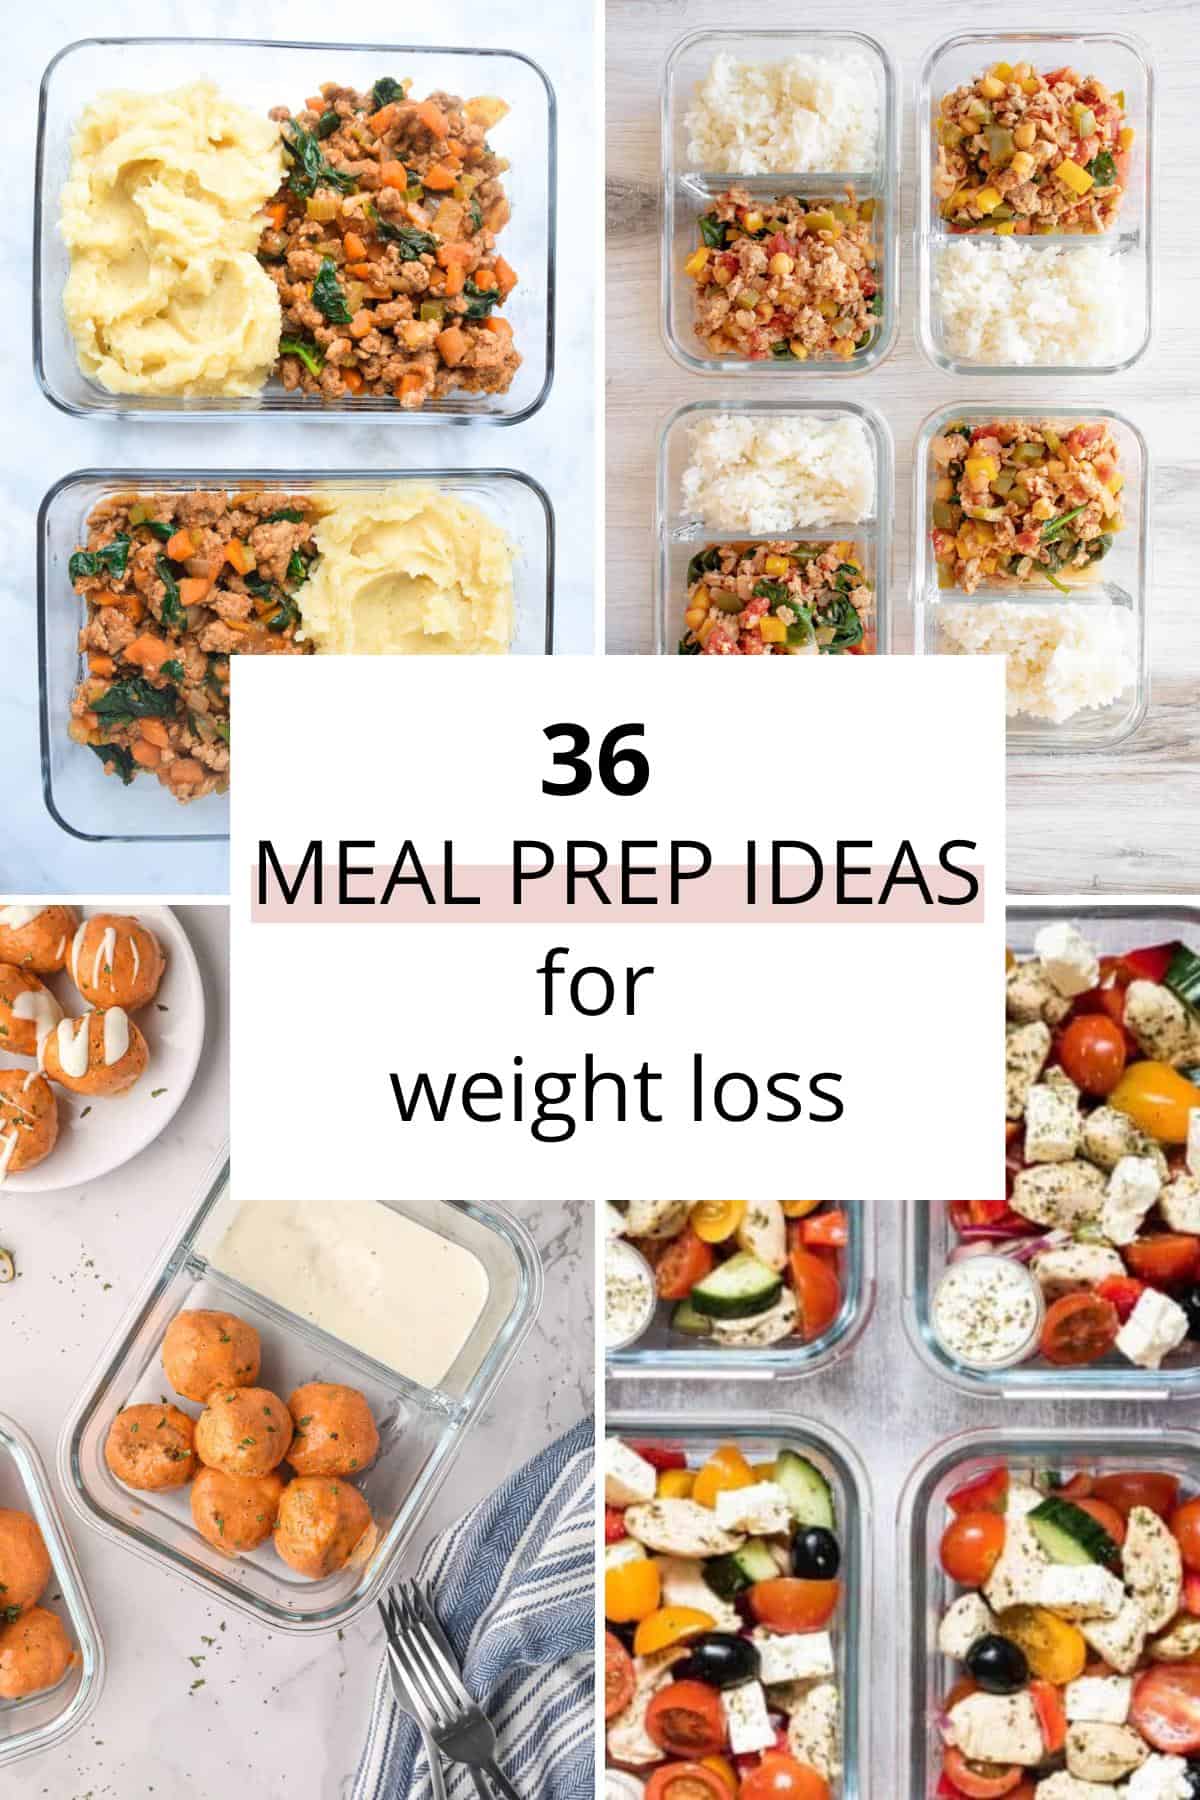 Collage of meal prep ideas for weight loss: spicy turkey meal prep bowls, buffalo turkey meatballs, greek chicken meal prep bowls, and Shepard's pie meal prep bowls. 